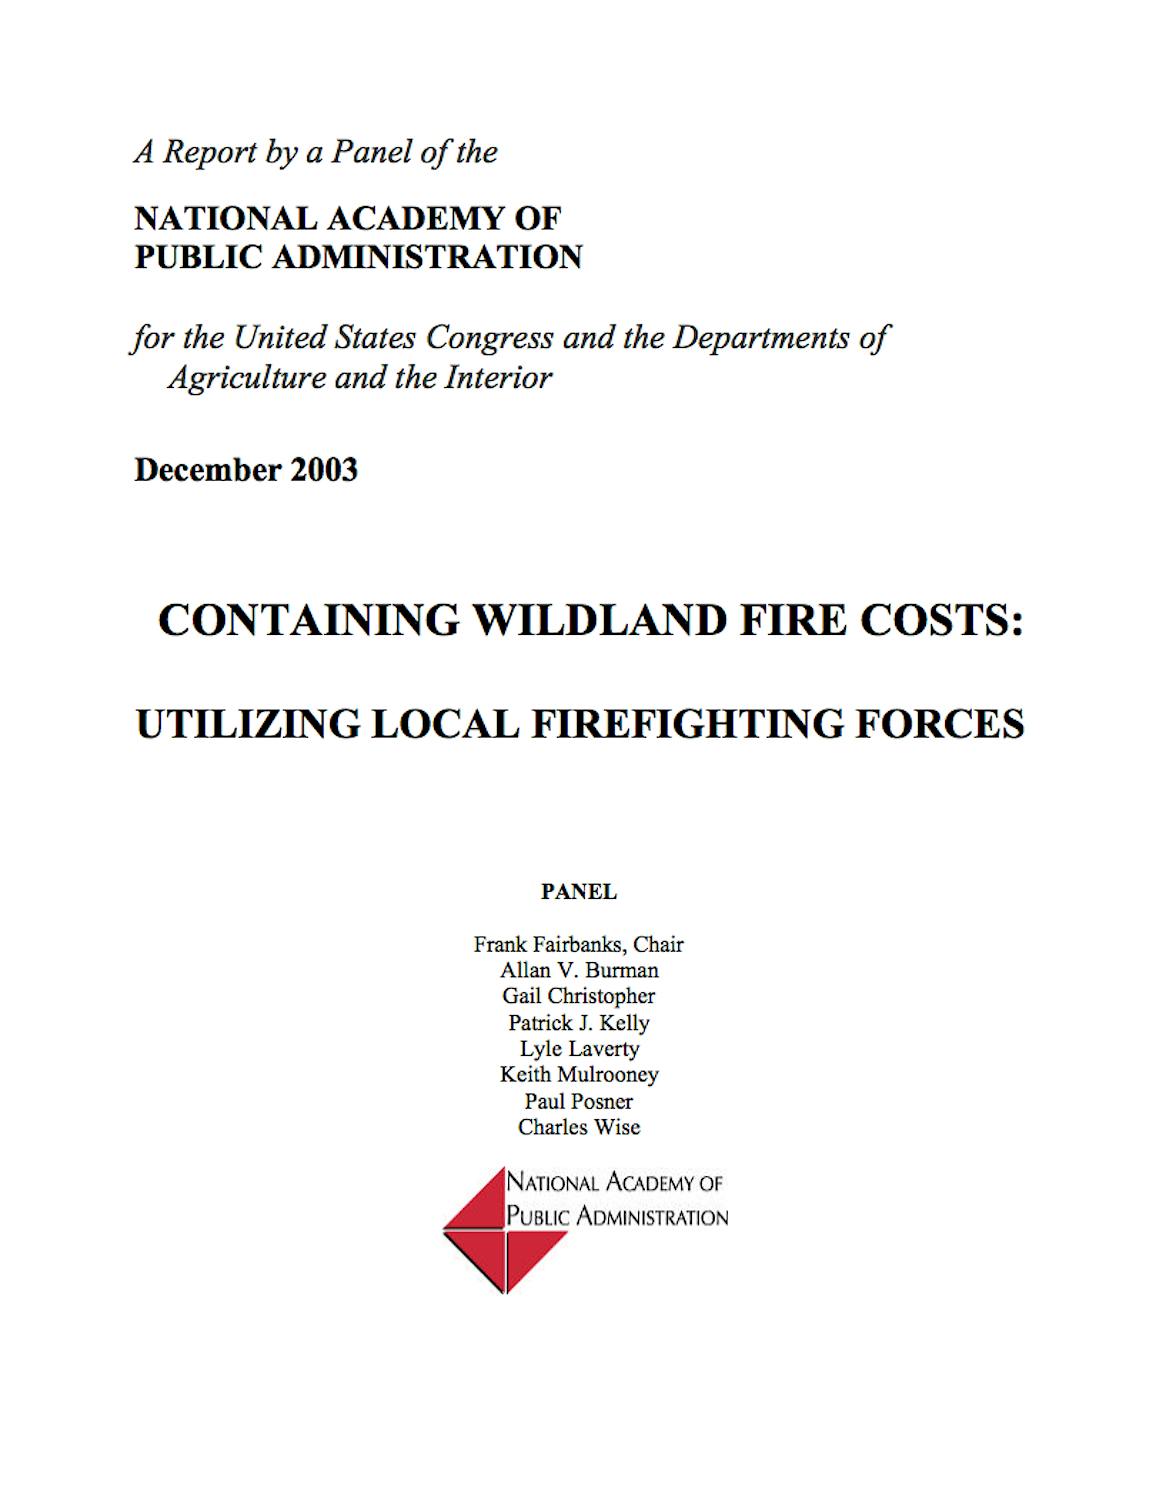 03 12 Containing Widland Fire Costs Utilizing Local Firefighting Forces